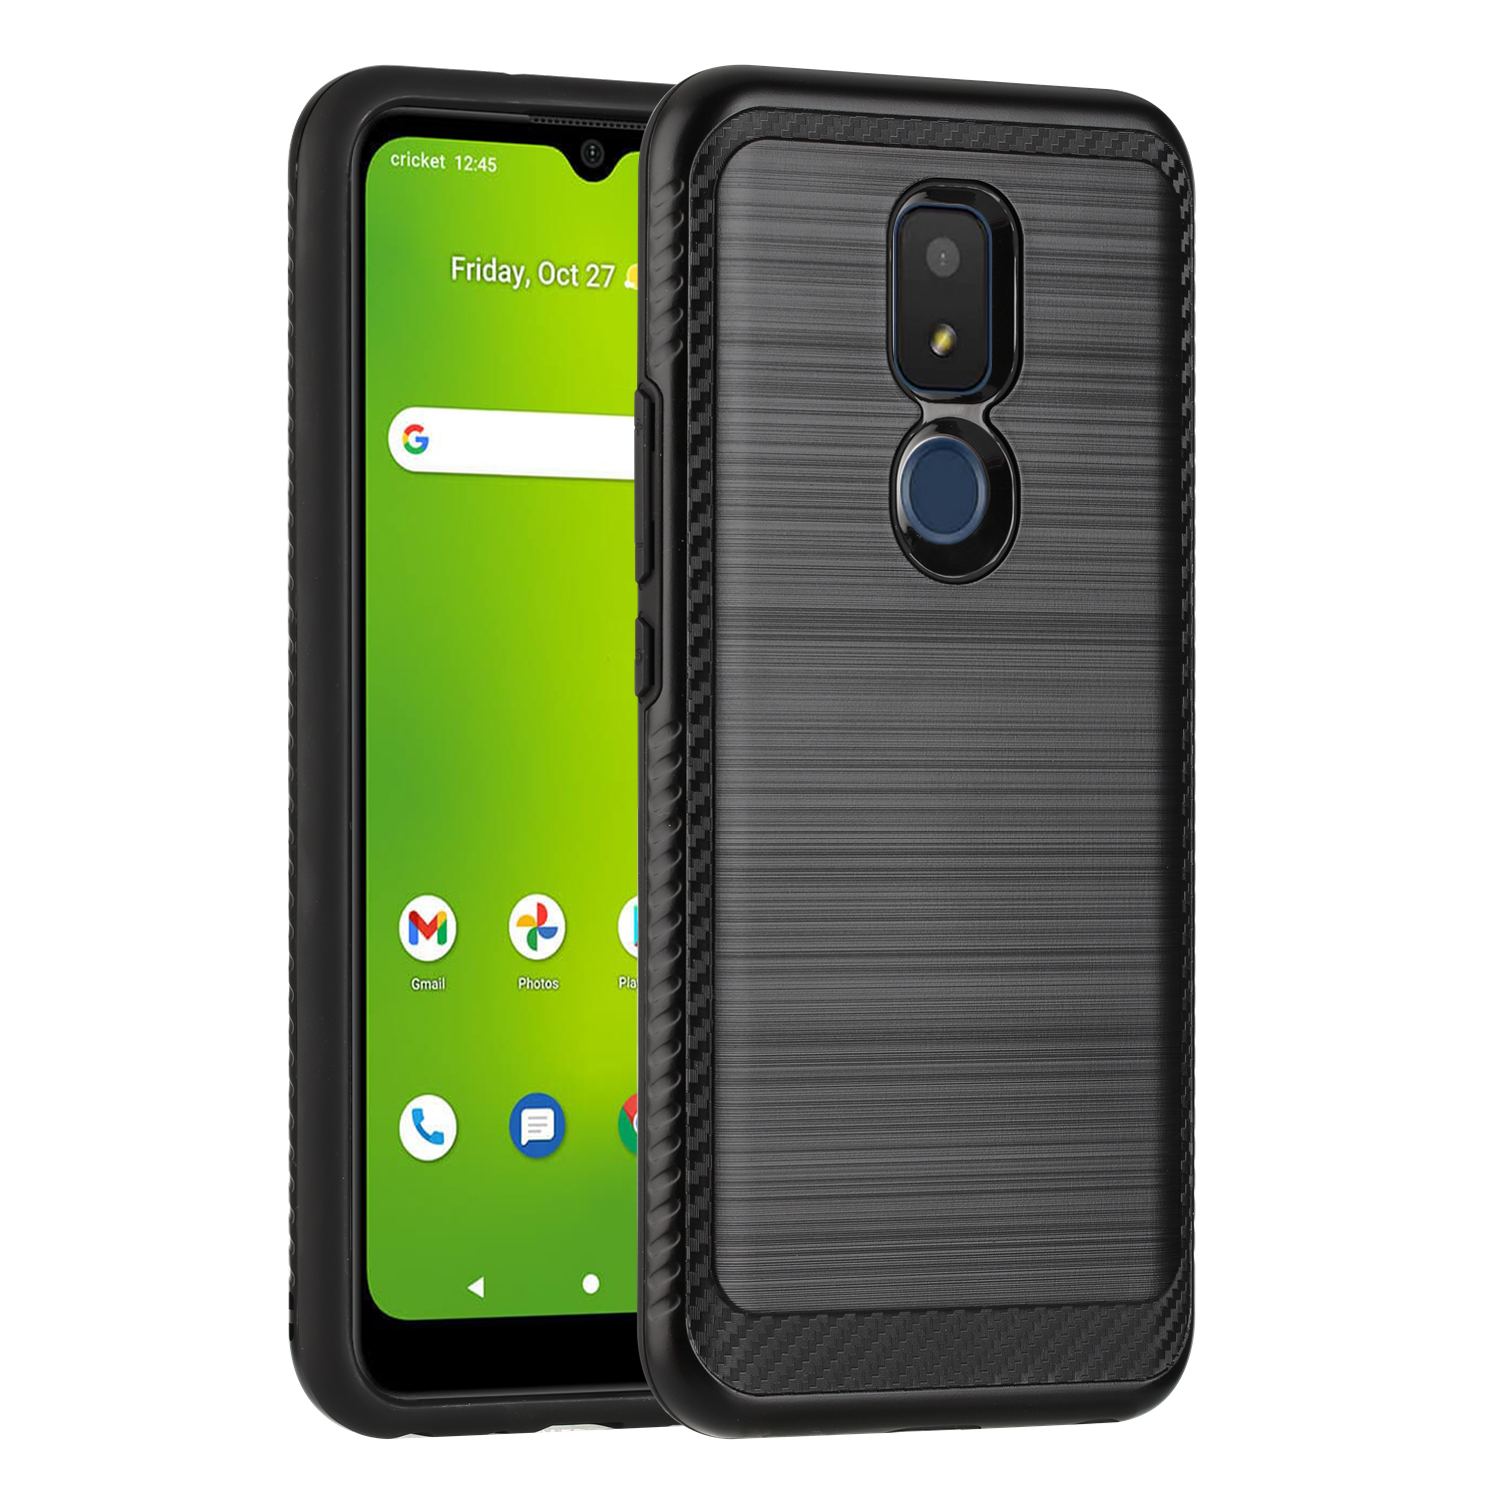 Dual Layer Protective Armor Case for Cricket Icon 3 / AT&T Motivate 2 (Black)